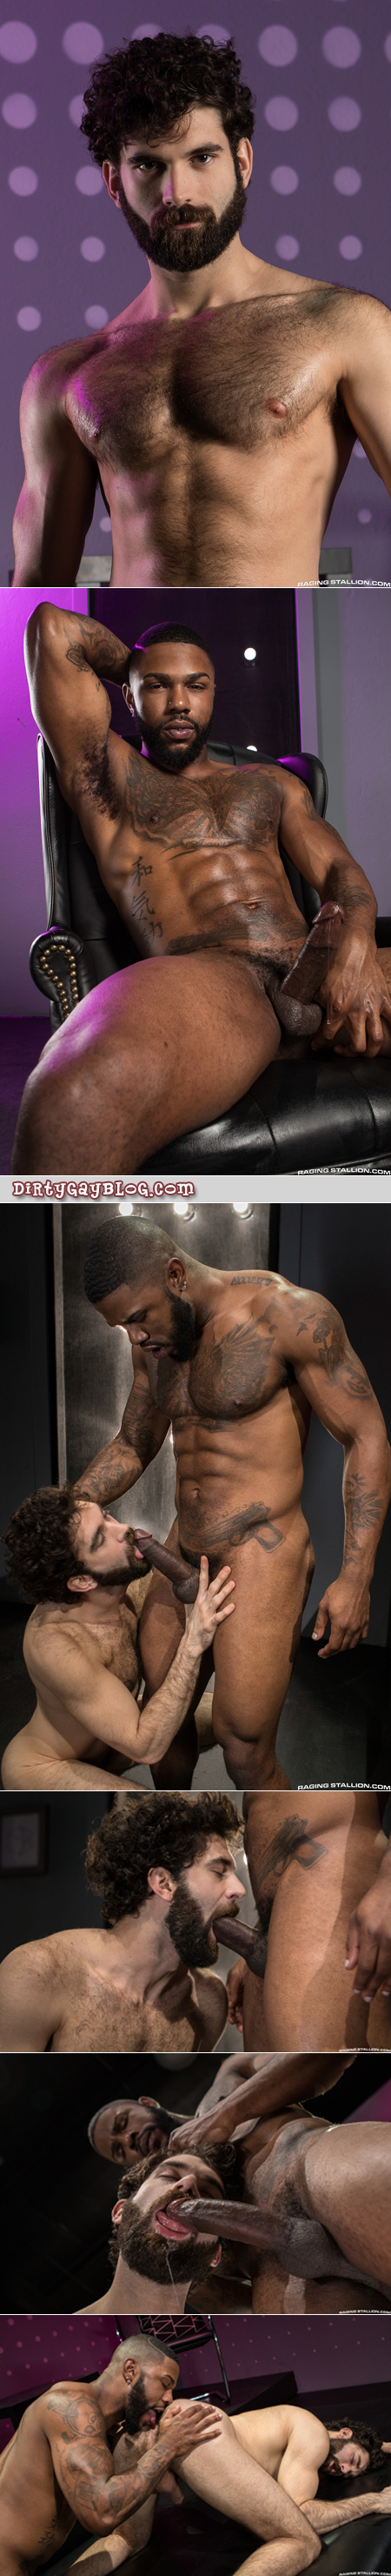 Black muscle stud fucking a fit hairy otter man in the ass.